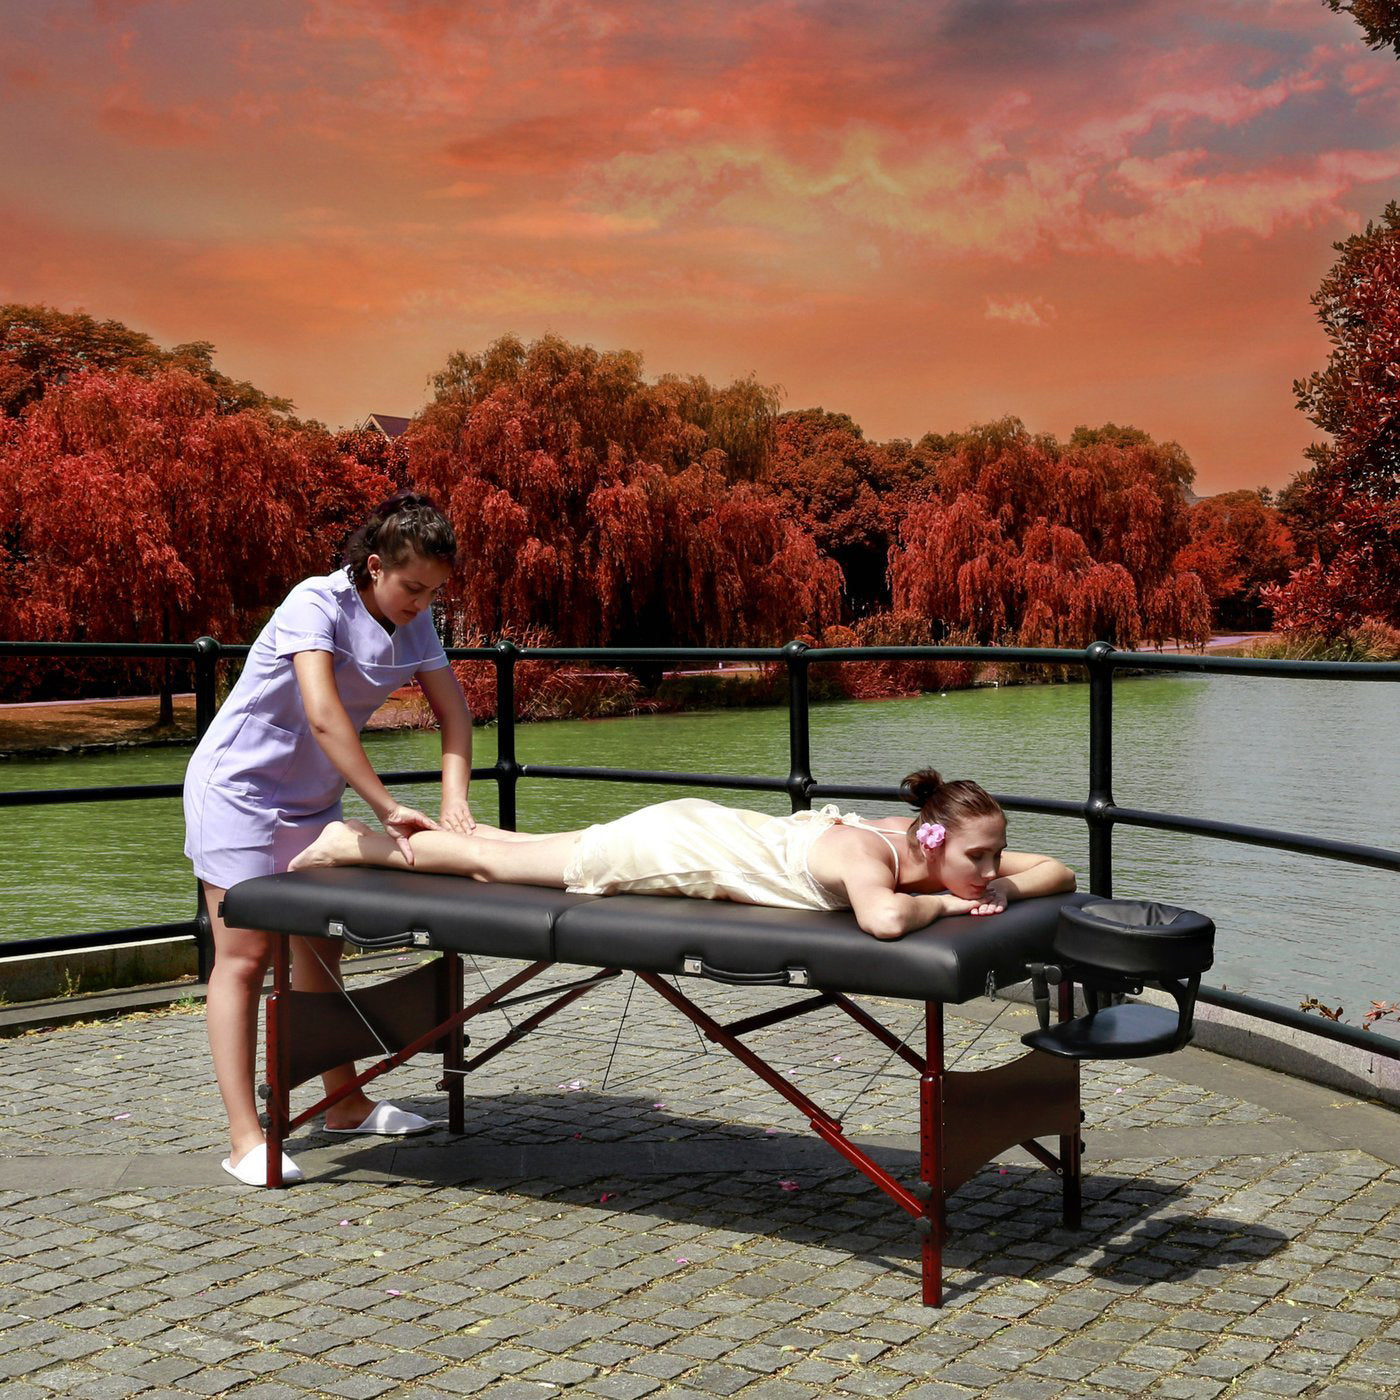 30" Roma™ LX Portable Massage Table Package with Best Selling Size (Black)